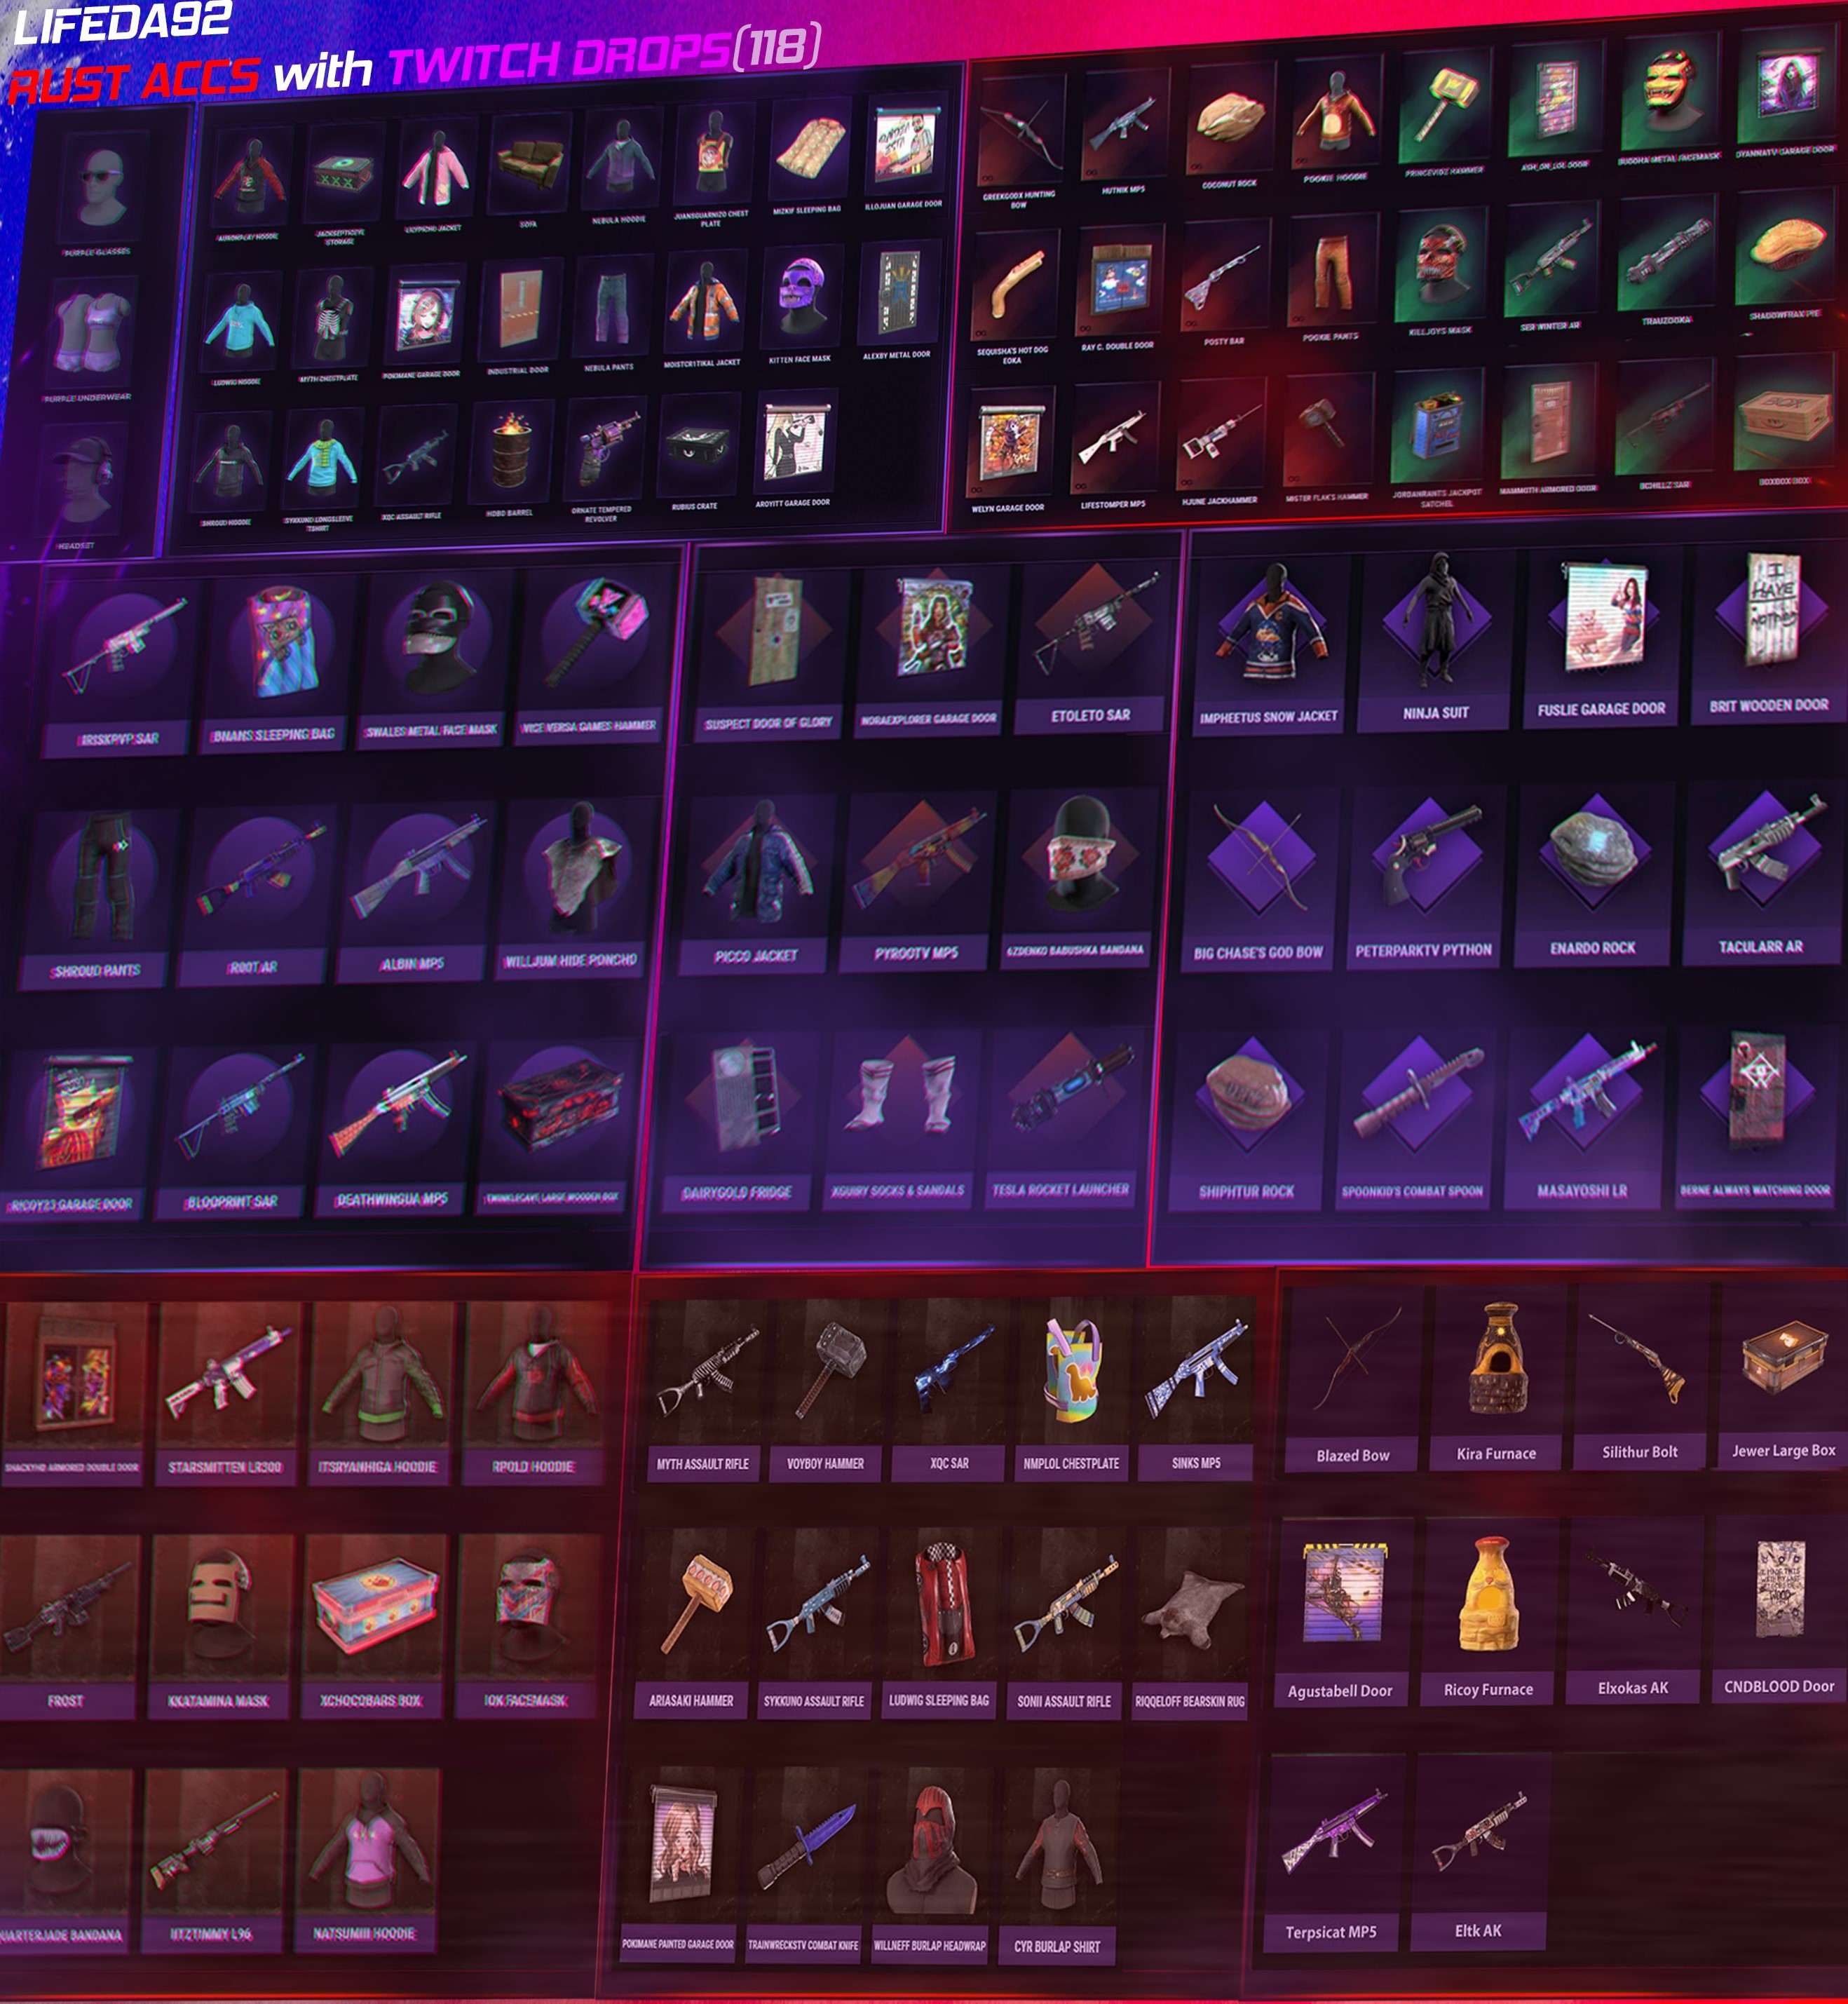 Buy Rust all twitch drops (118), all dlc, 198 items cheap, choose from